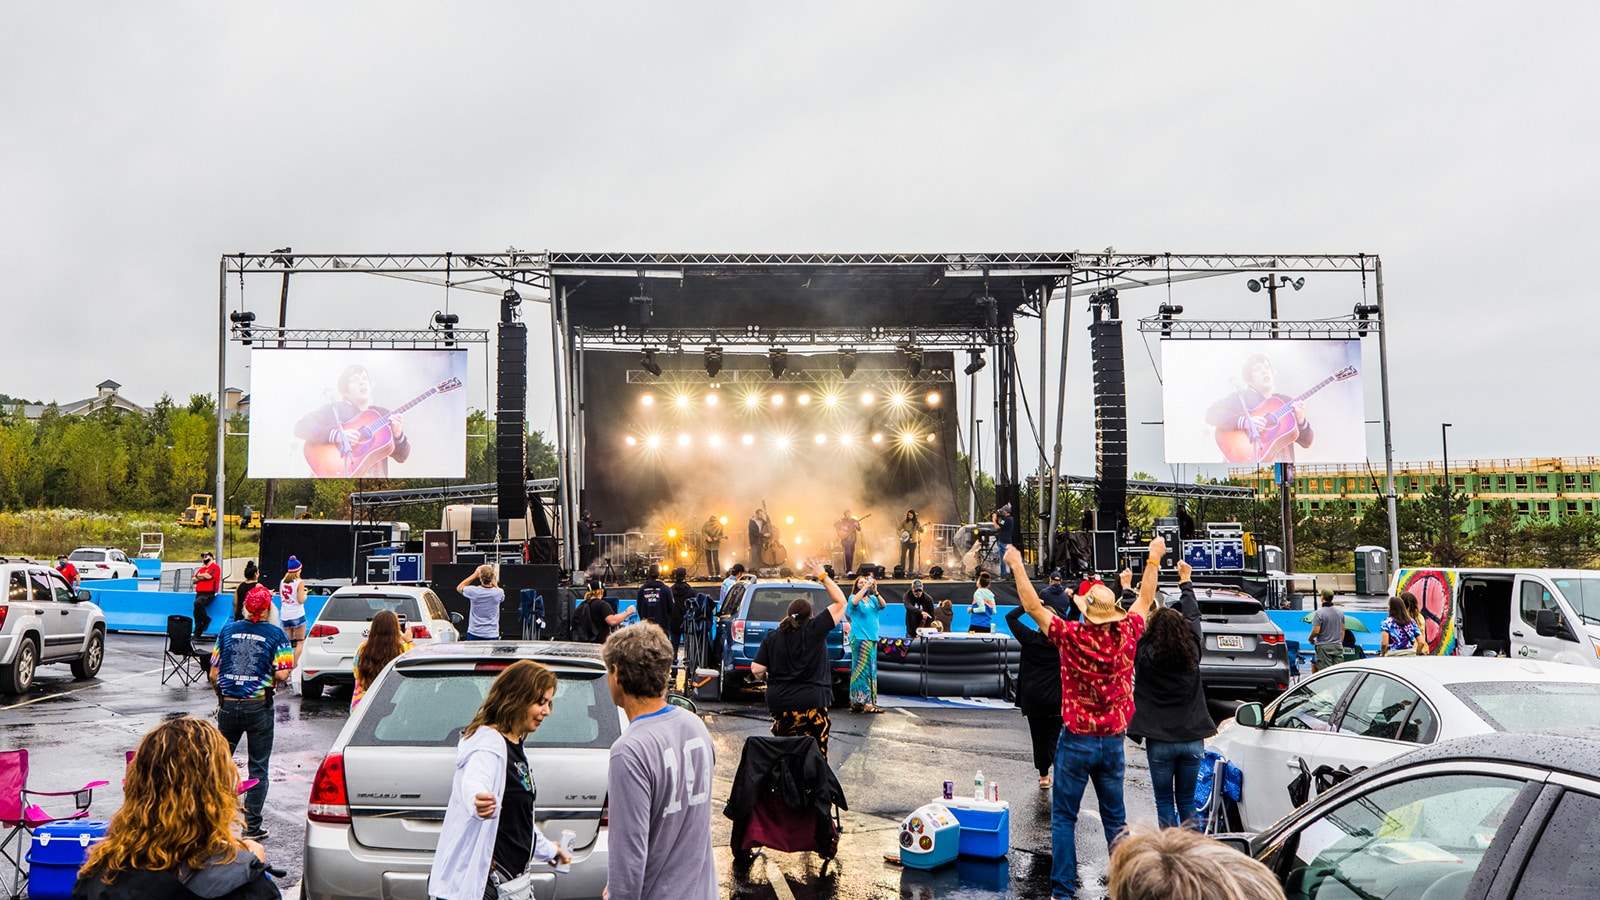 Meyer Sound Meets Billy Strings at the Drive-In with LEOPARD System Provided by DBS Audio Systems